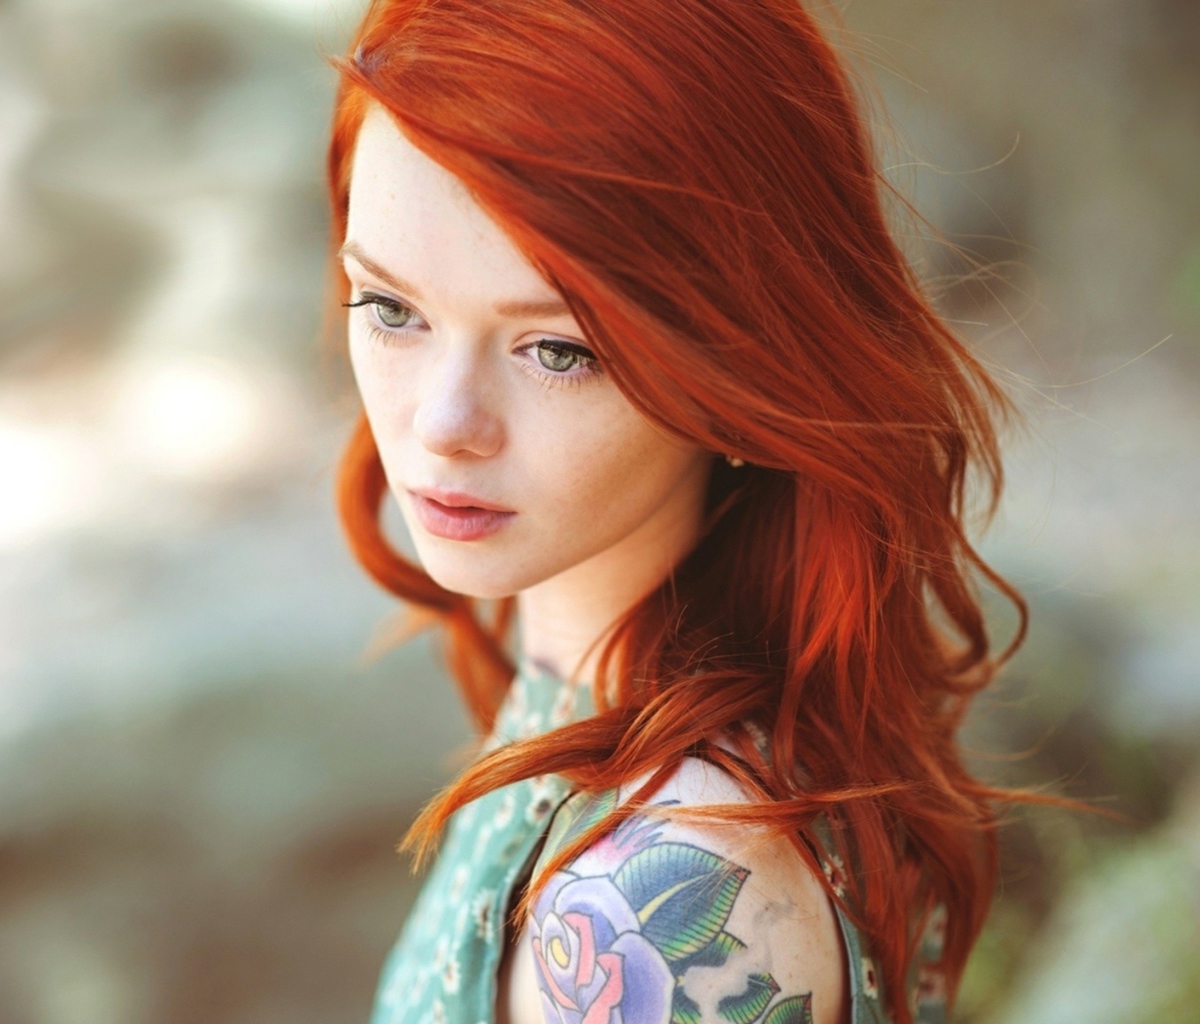 Beautiful Girl With Red Hair wallpaper 1200x1024